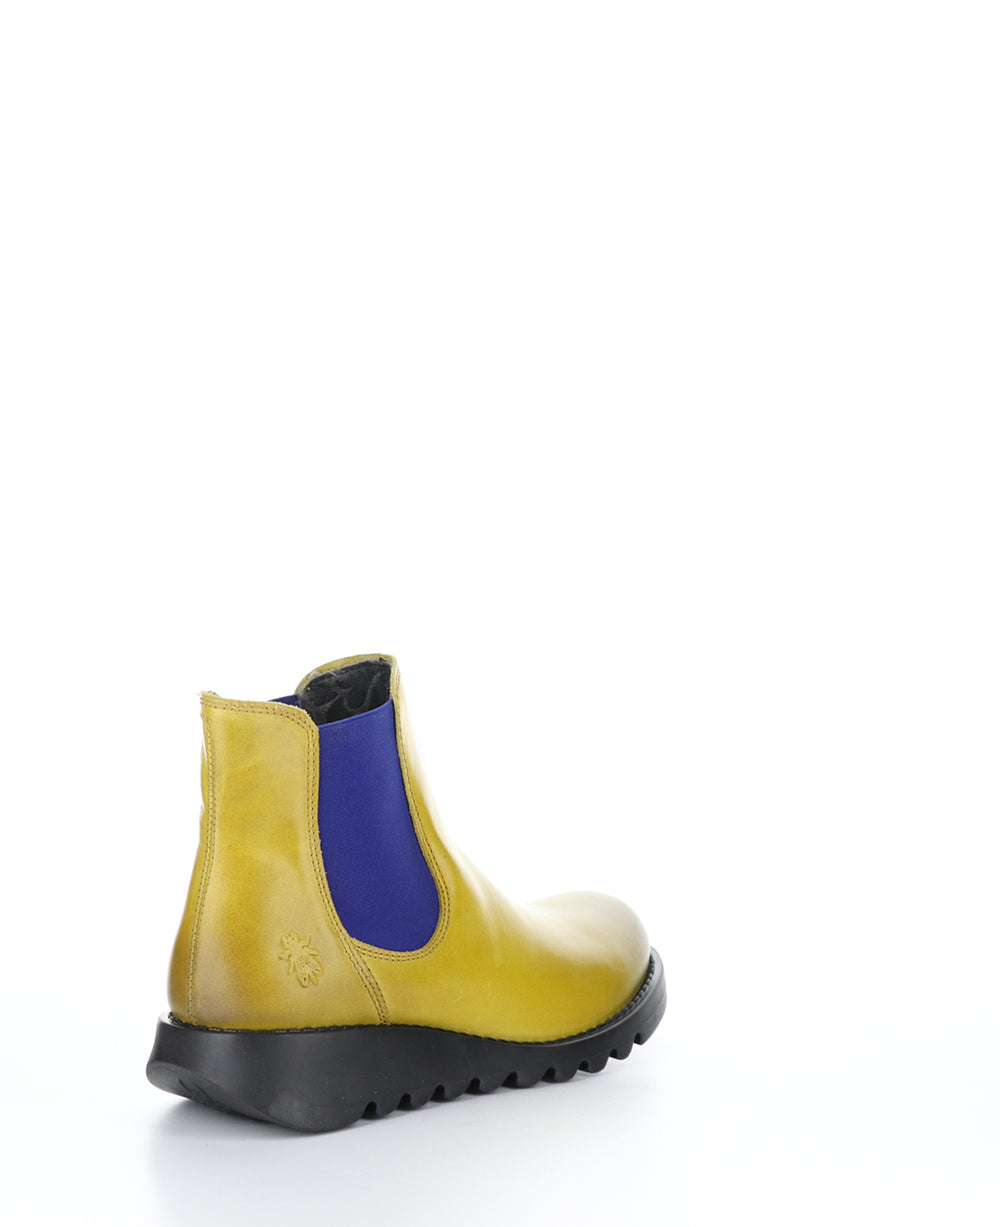 SALV Mustard Round Toe Ankle Boots|SALV Bottines à Bout Rond in Jaune